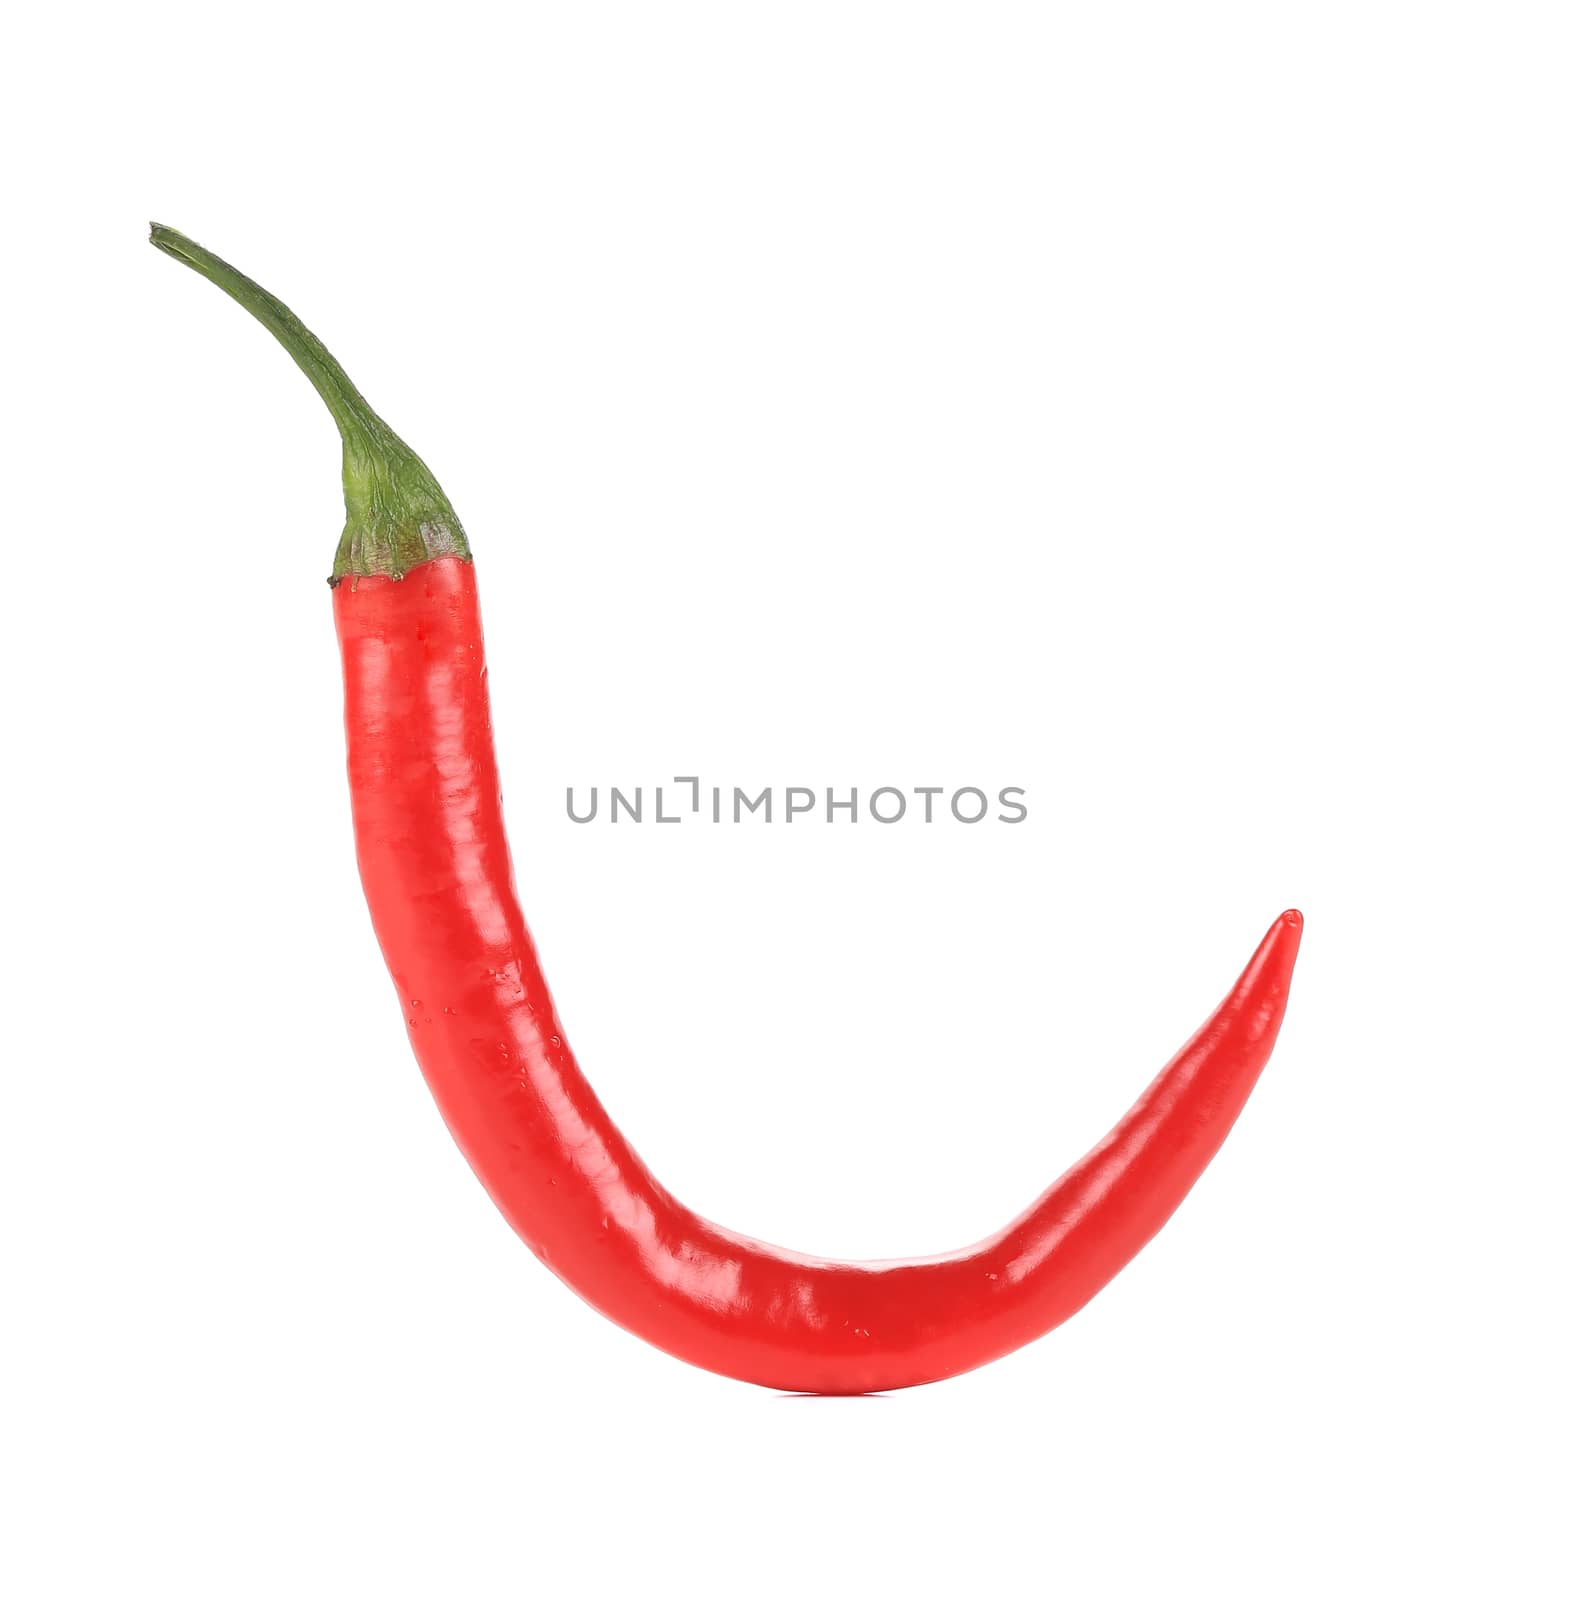 Red chili pepper in hook shape. Isolated on a white background.